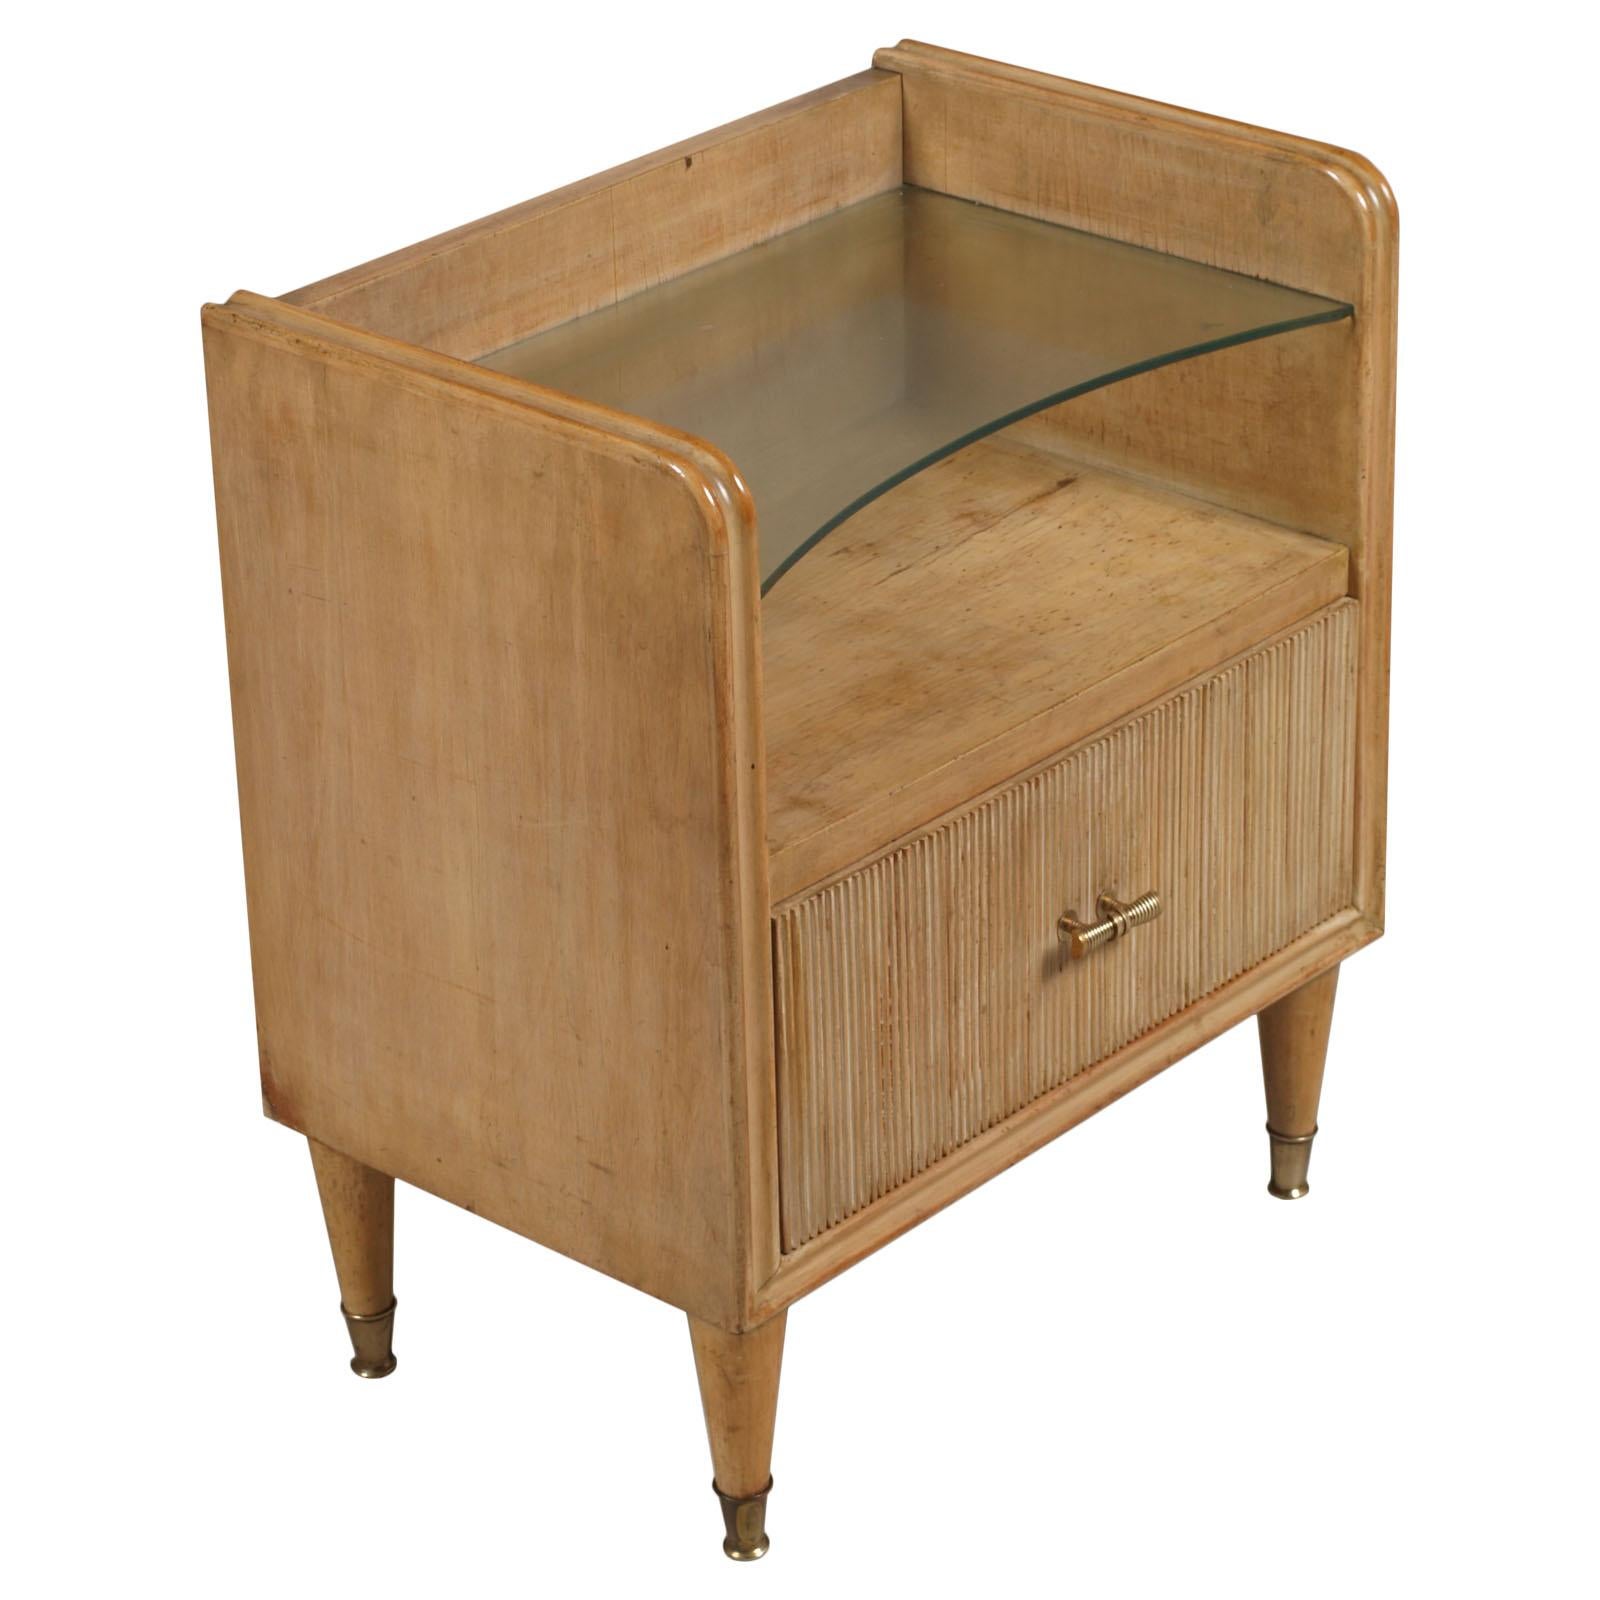 1930s Nightstand Art Deco, Gio Ponti attributed, from Cantù Canale Mobili d'Arte